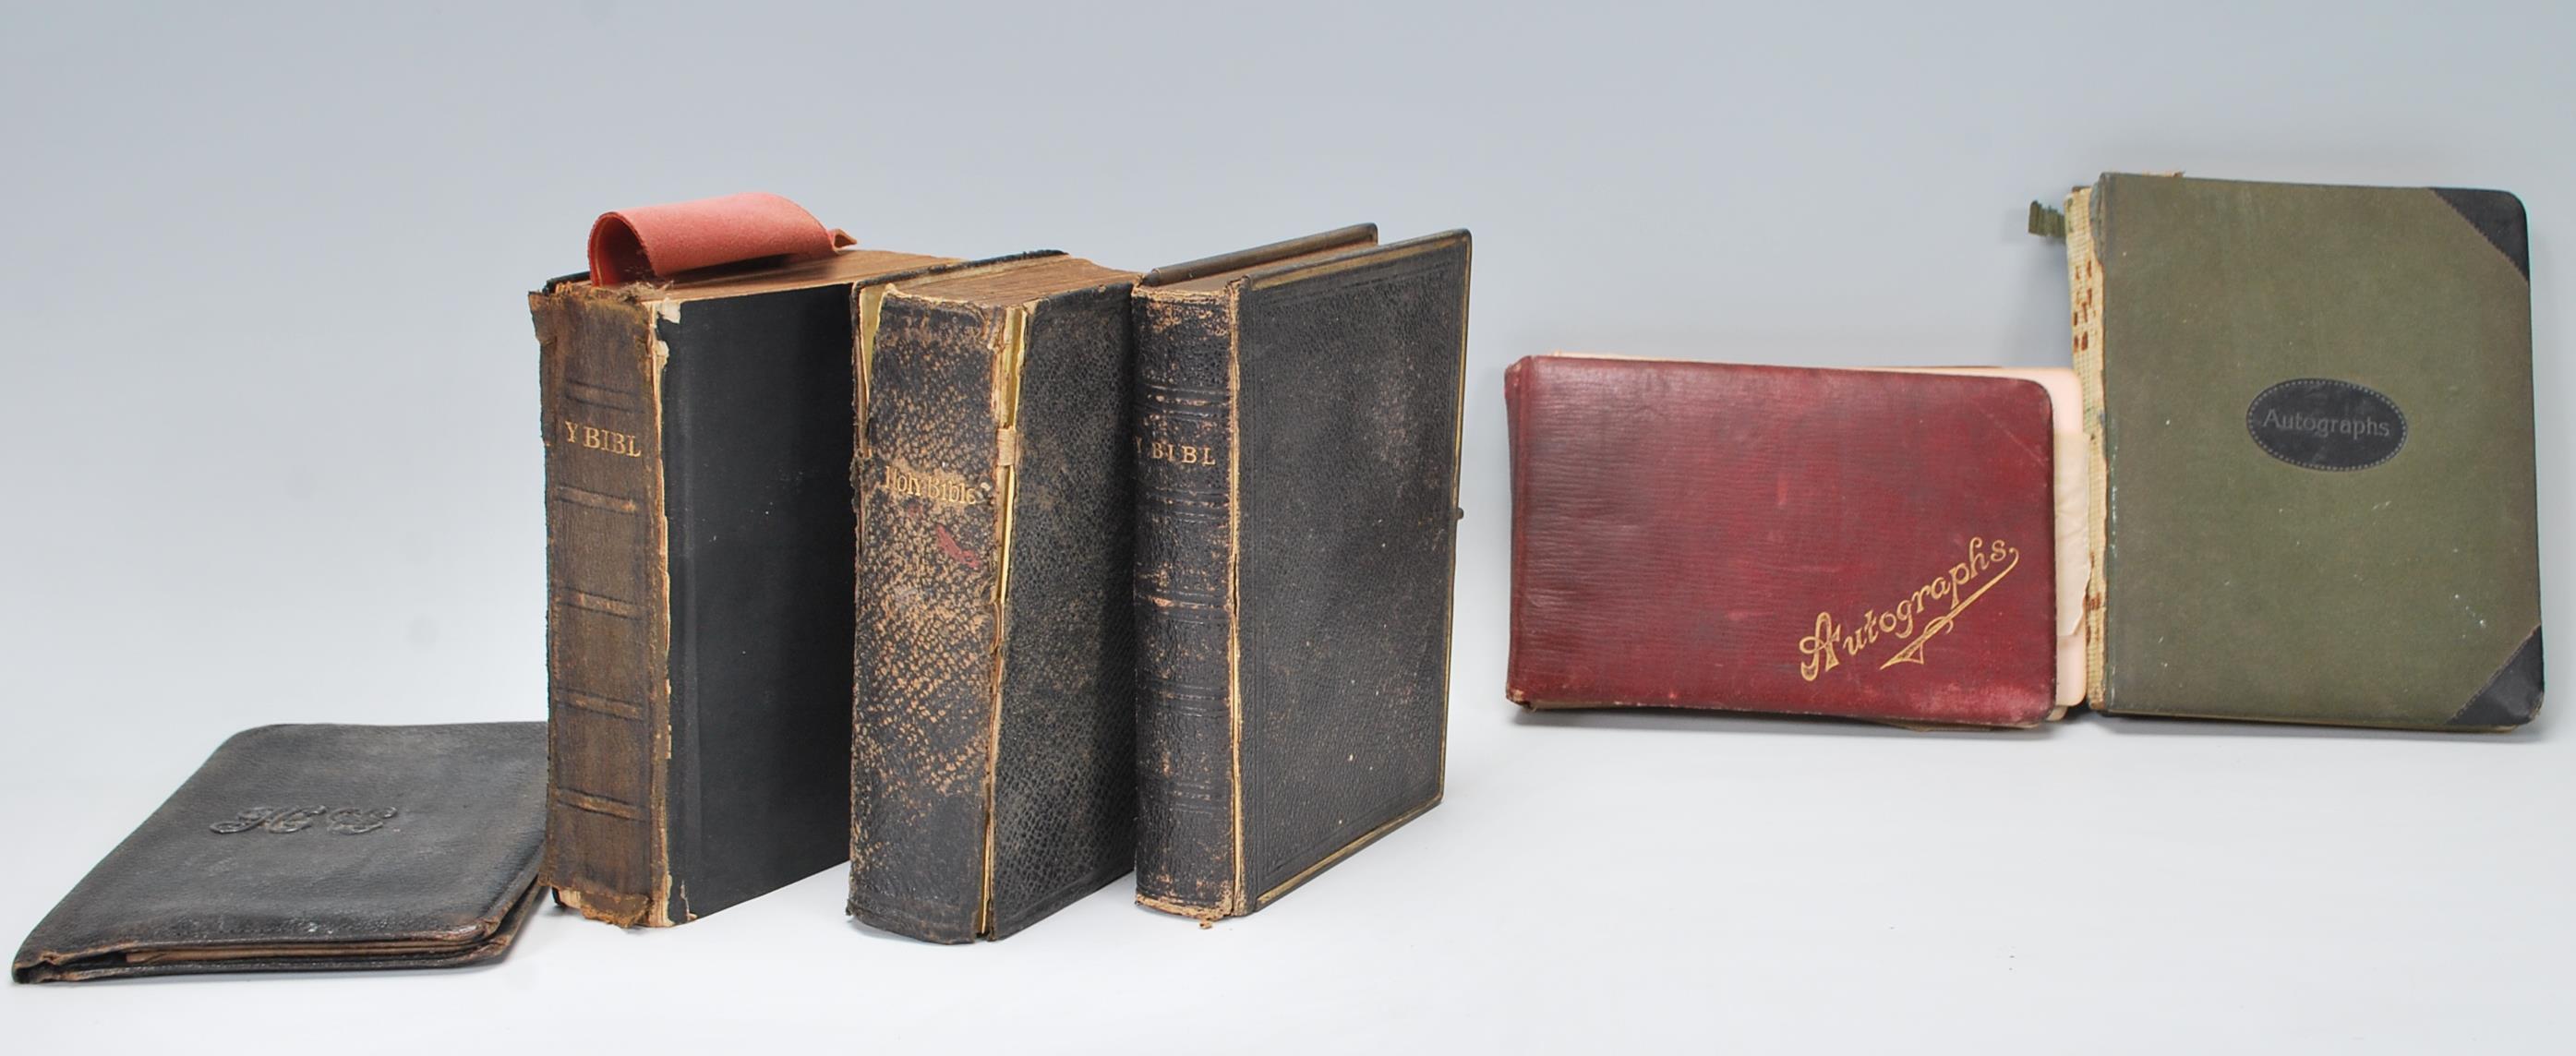 Two autograph books dating to the early 20th Century filled with sketches, poems, prose. dating back